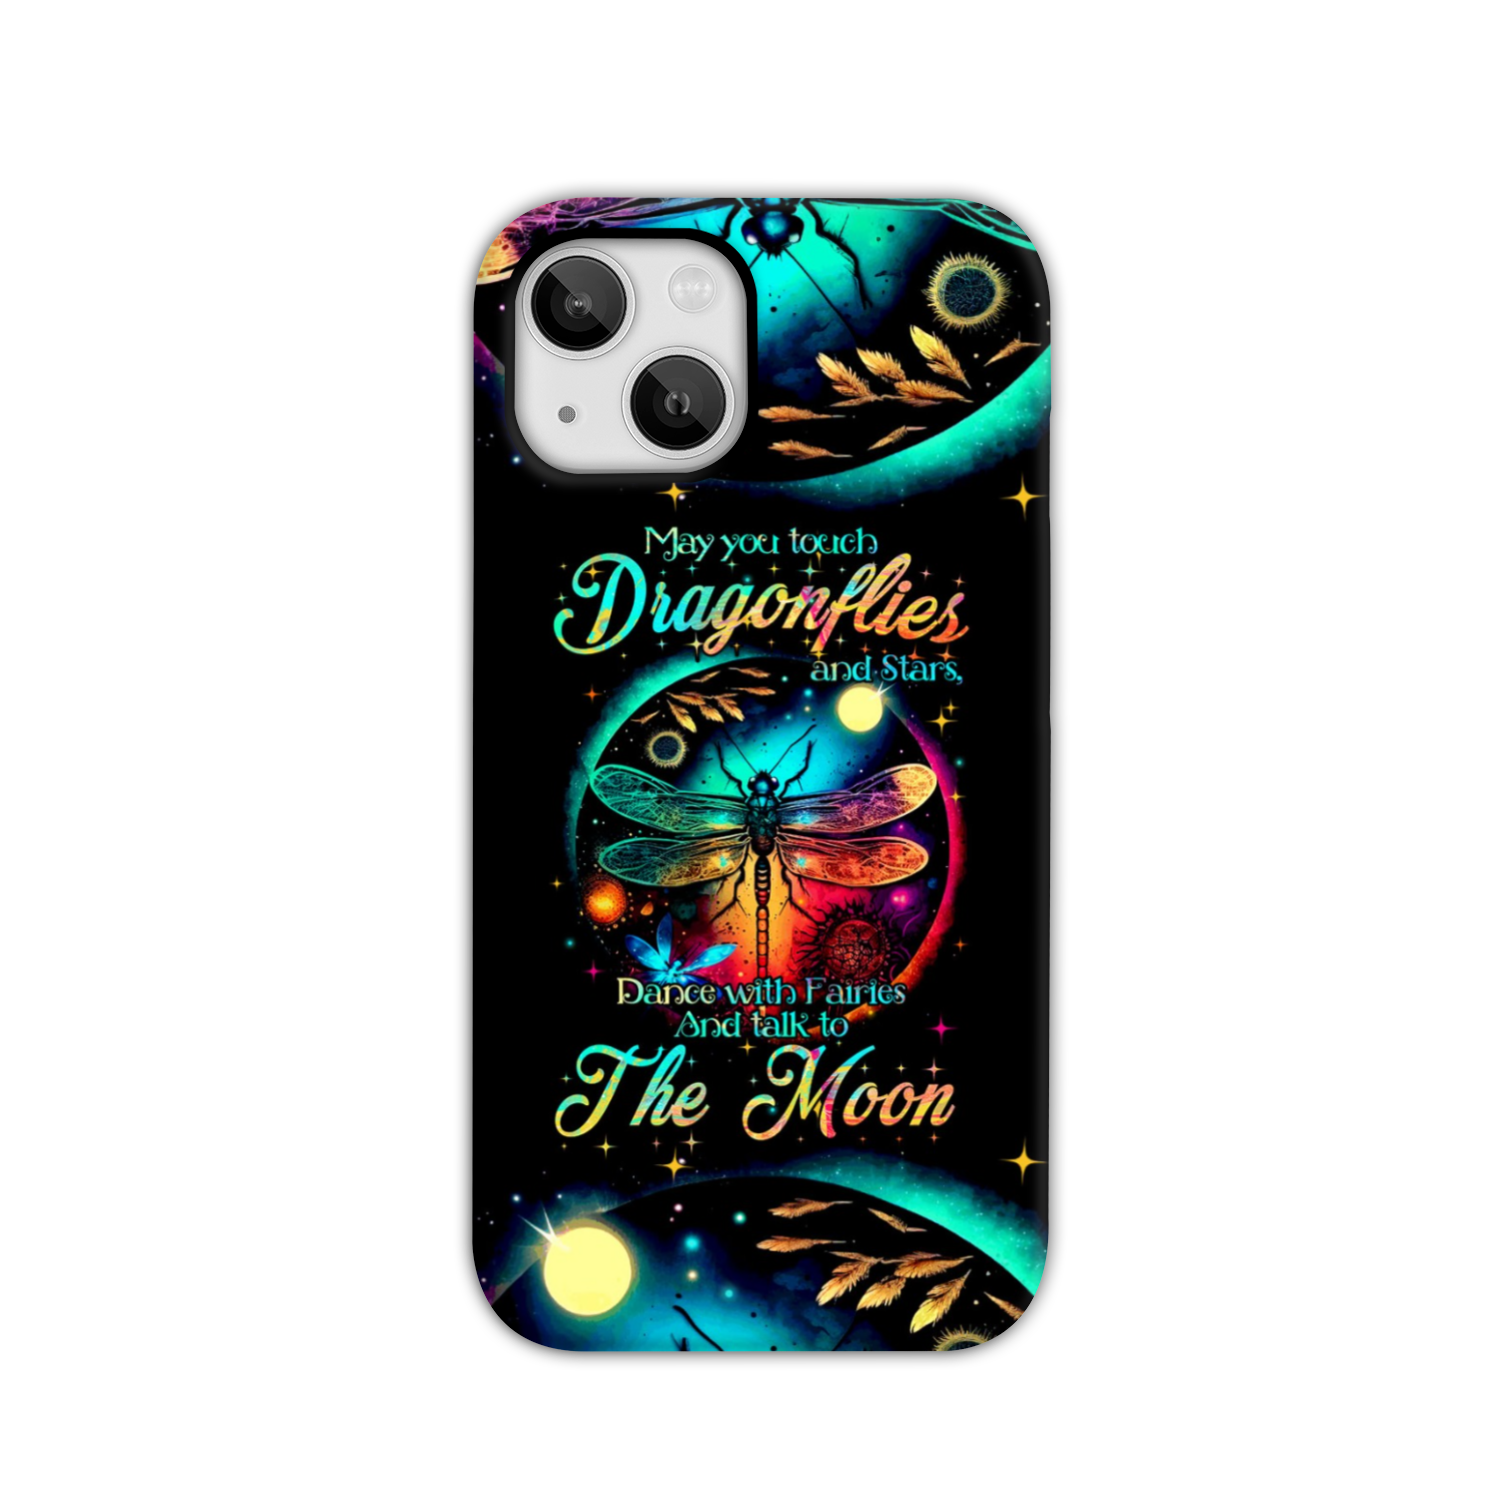 MAY YOU TOUCH DRAGONFLIES AND STARS PHONE CASE - TYTM0504231